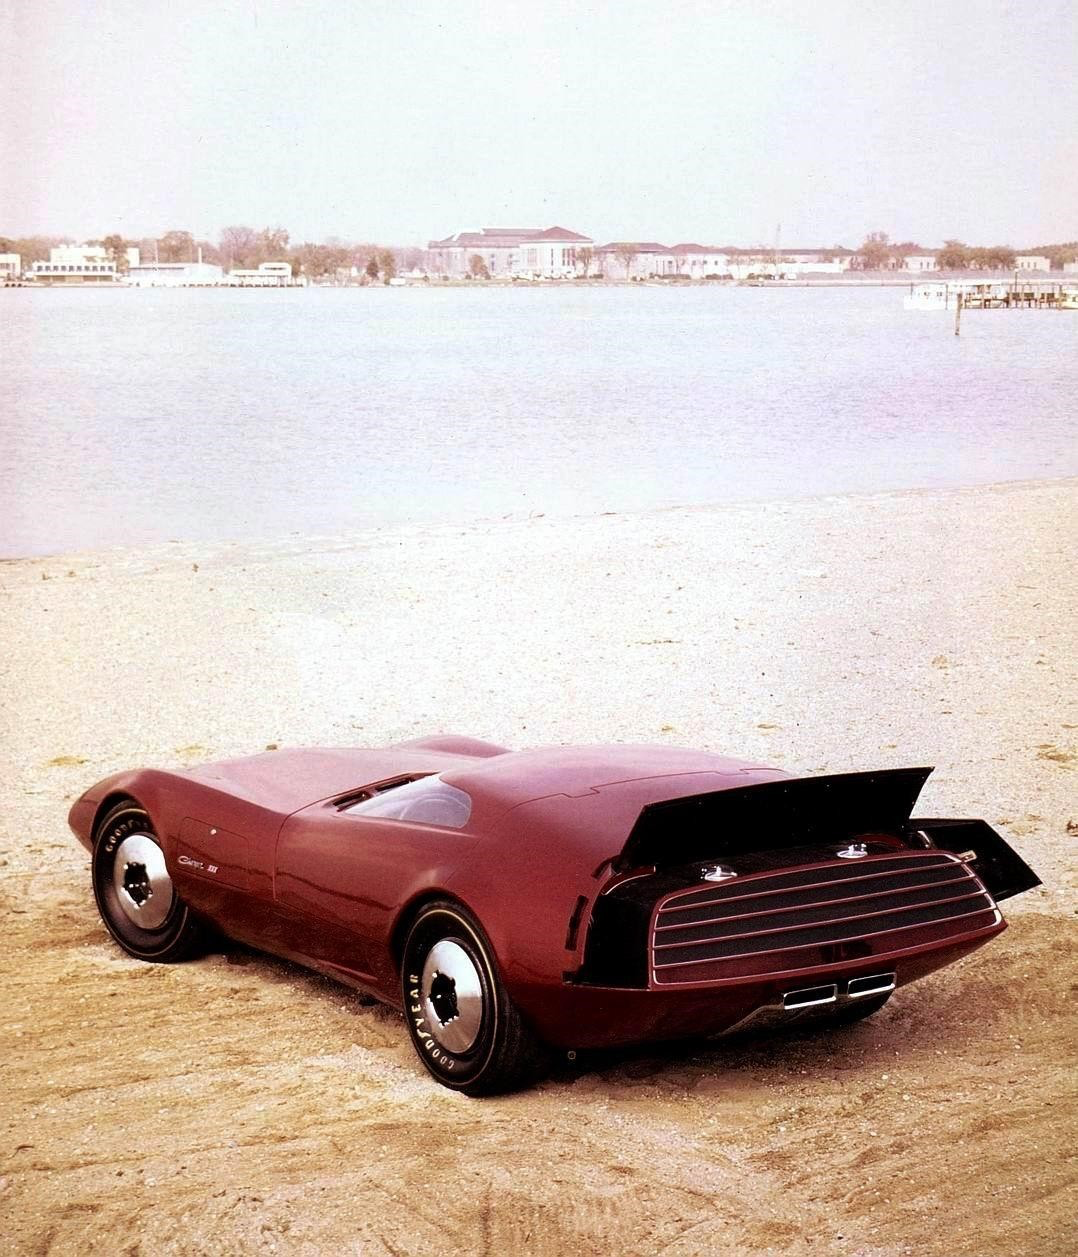 Dodge Charger III Concept Car back